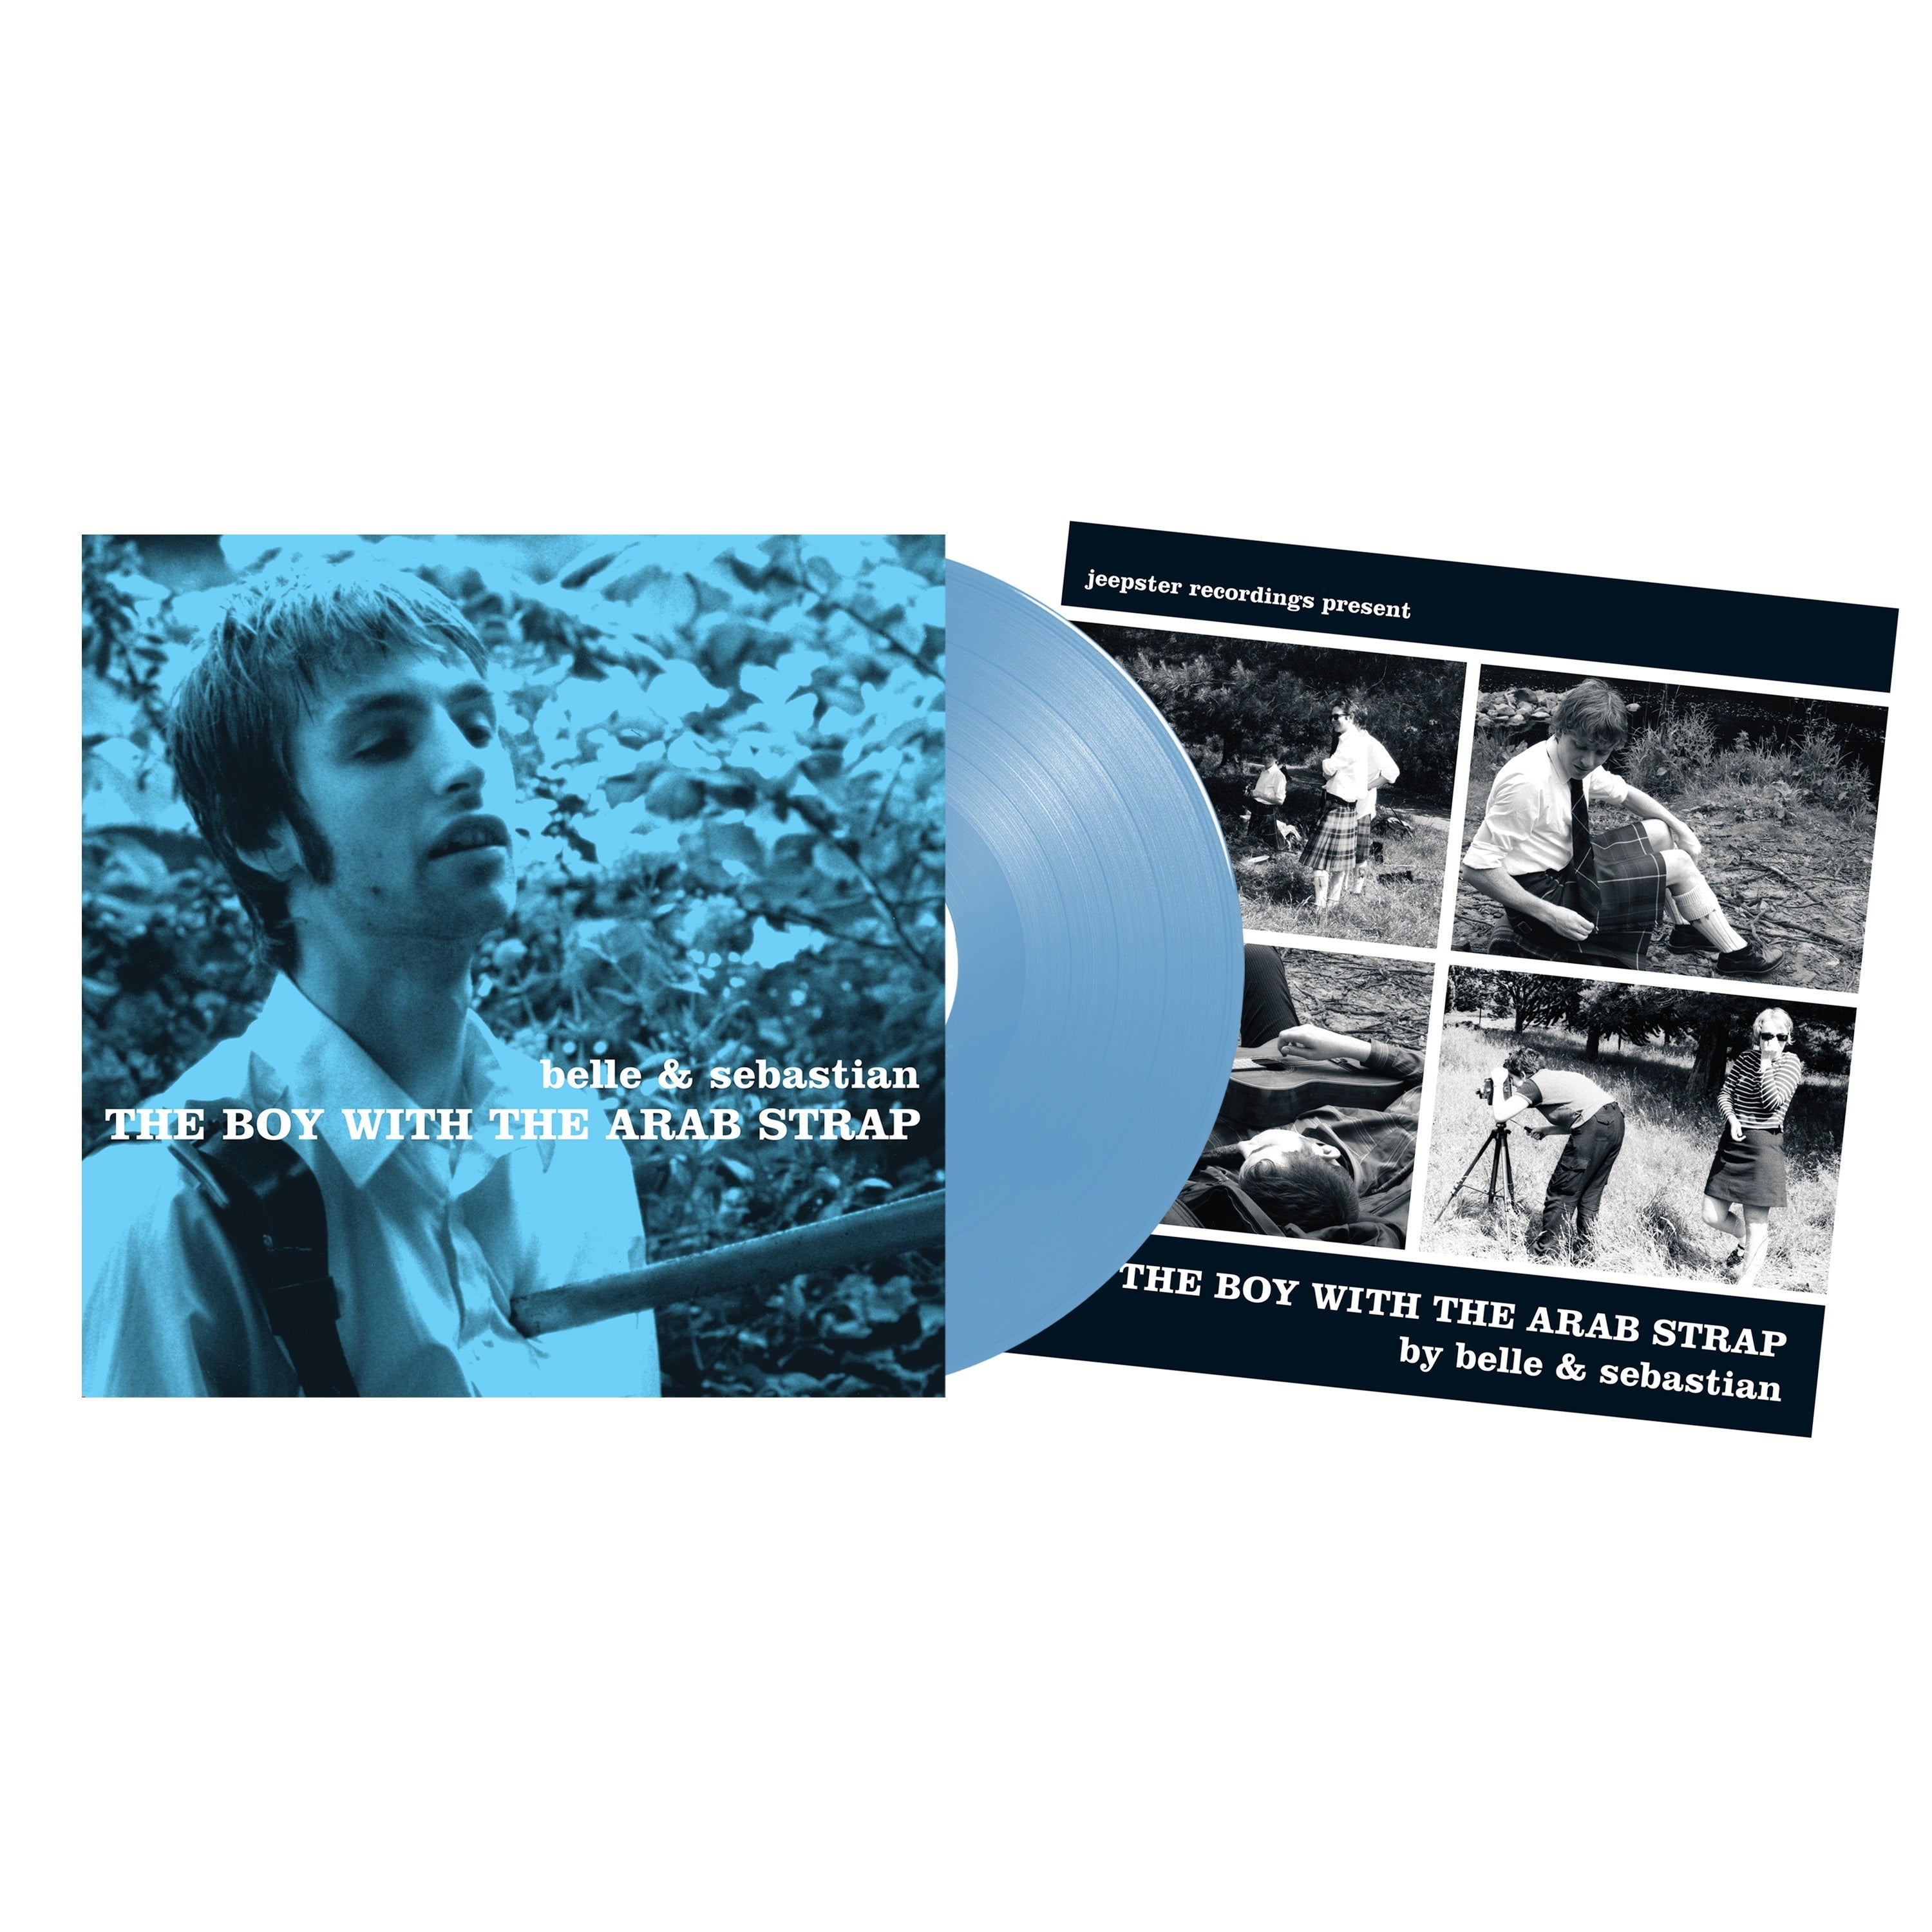 Belle and Sebastian - The Boy With The Arab Strap (25th Anniversary Pale Blue Artwork Edition): Limited Pale Blue Vinyl LP